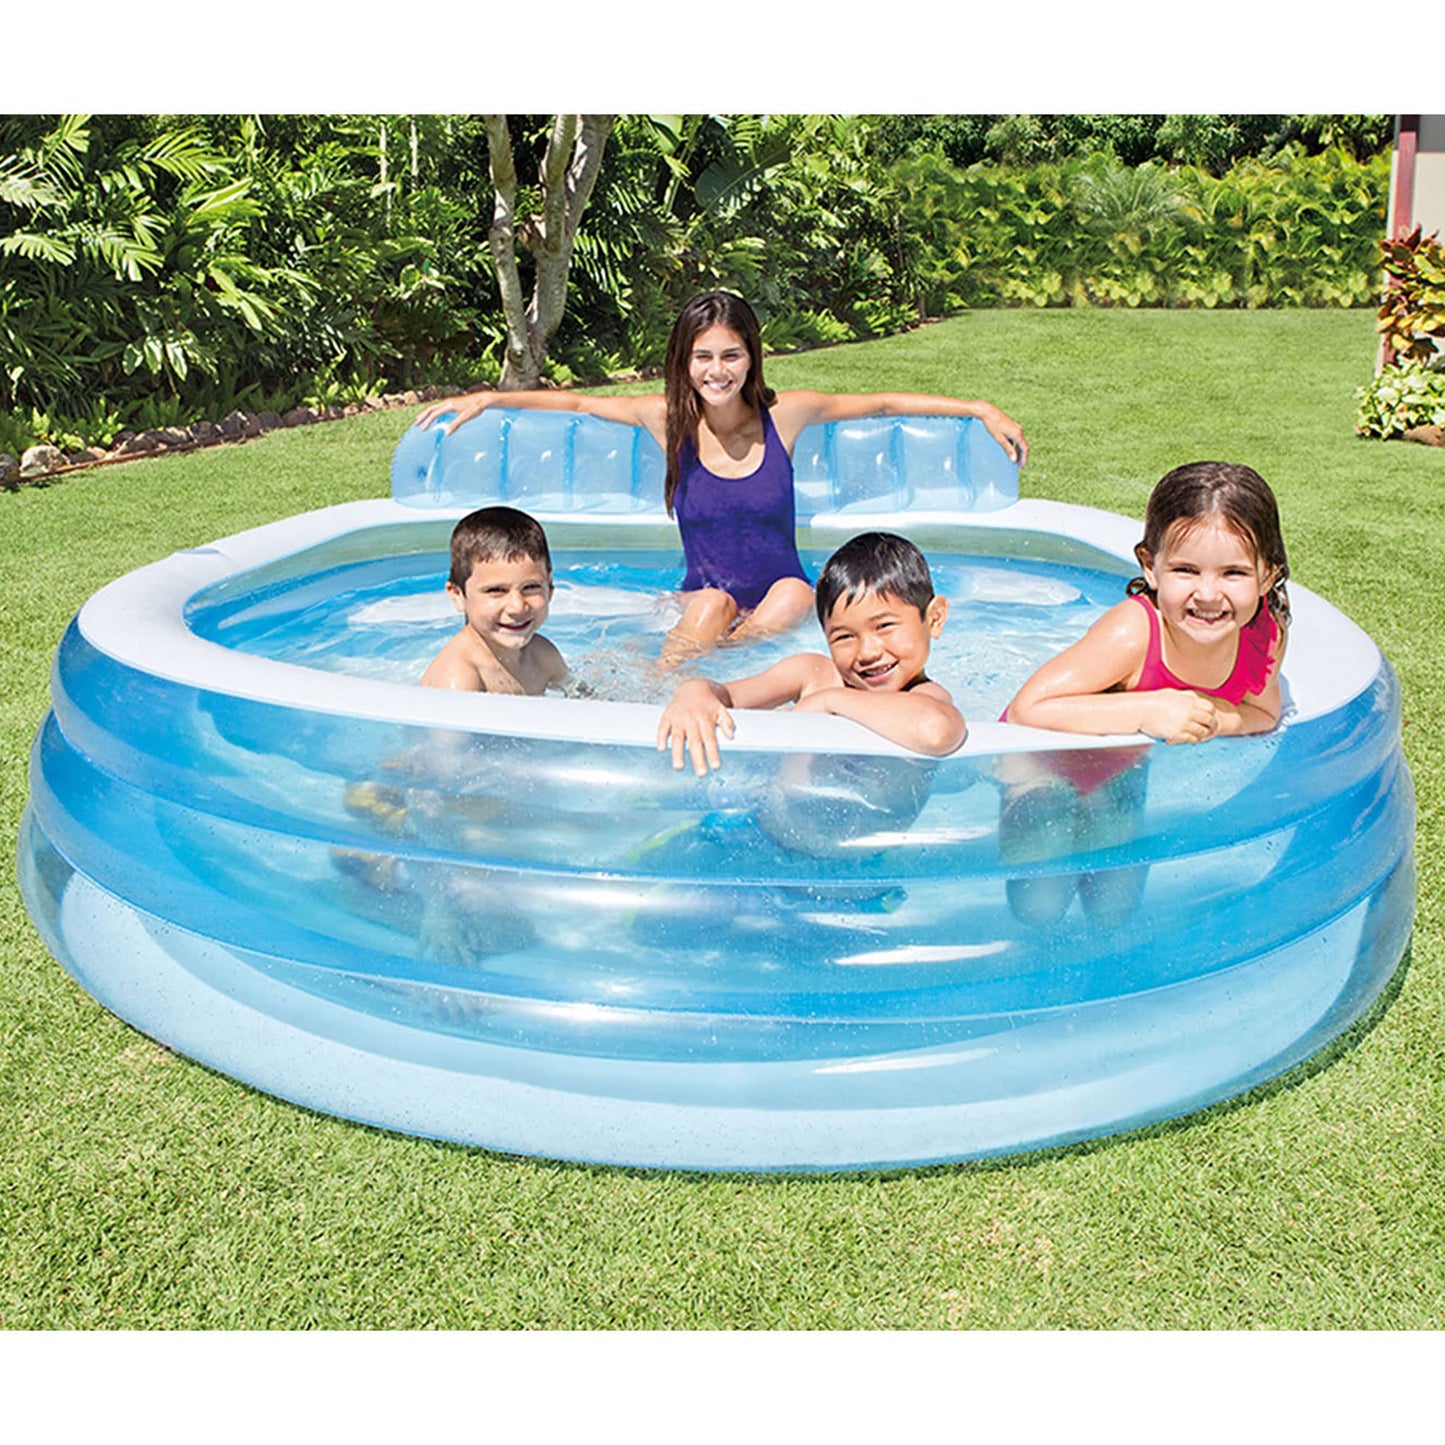 Intex Swim Center Inflatable Family Lounge Pool with Built In Bench, Cup Holder, and 2 Air Chambers for Pre Kindergarten Toys and Outdoor Use, Blue